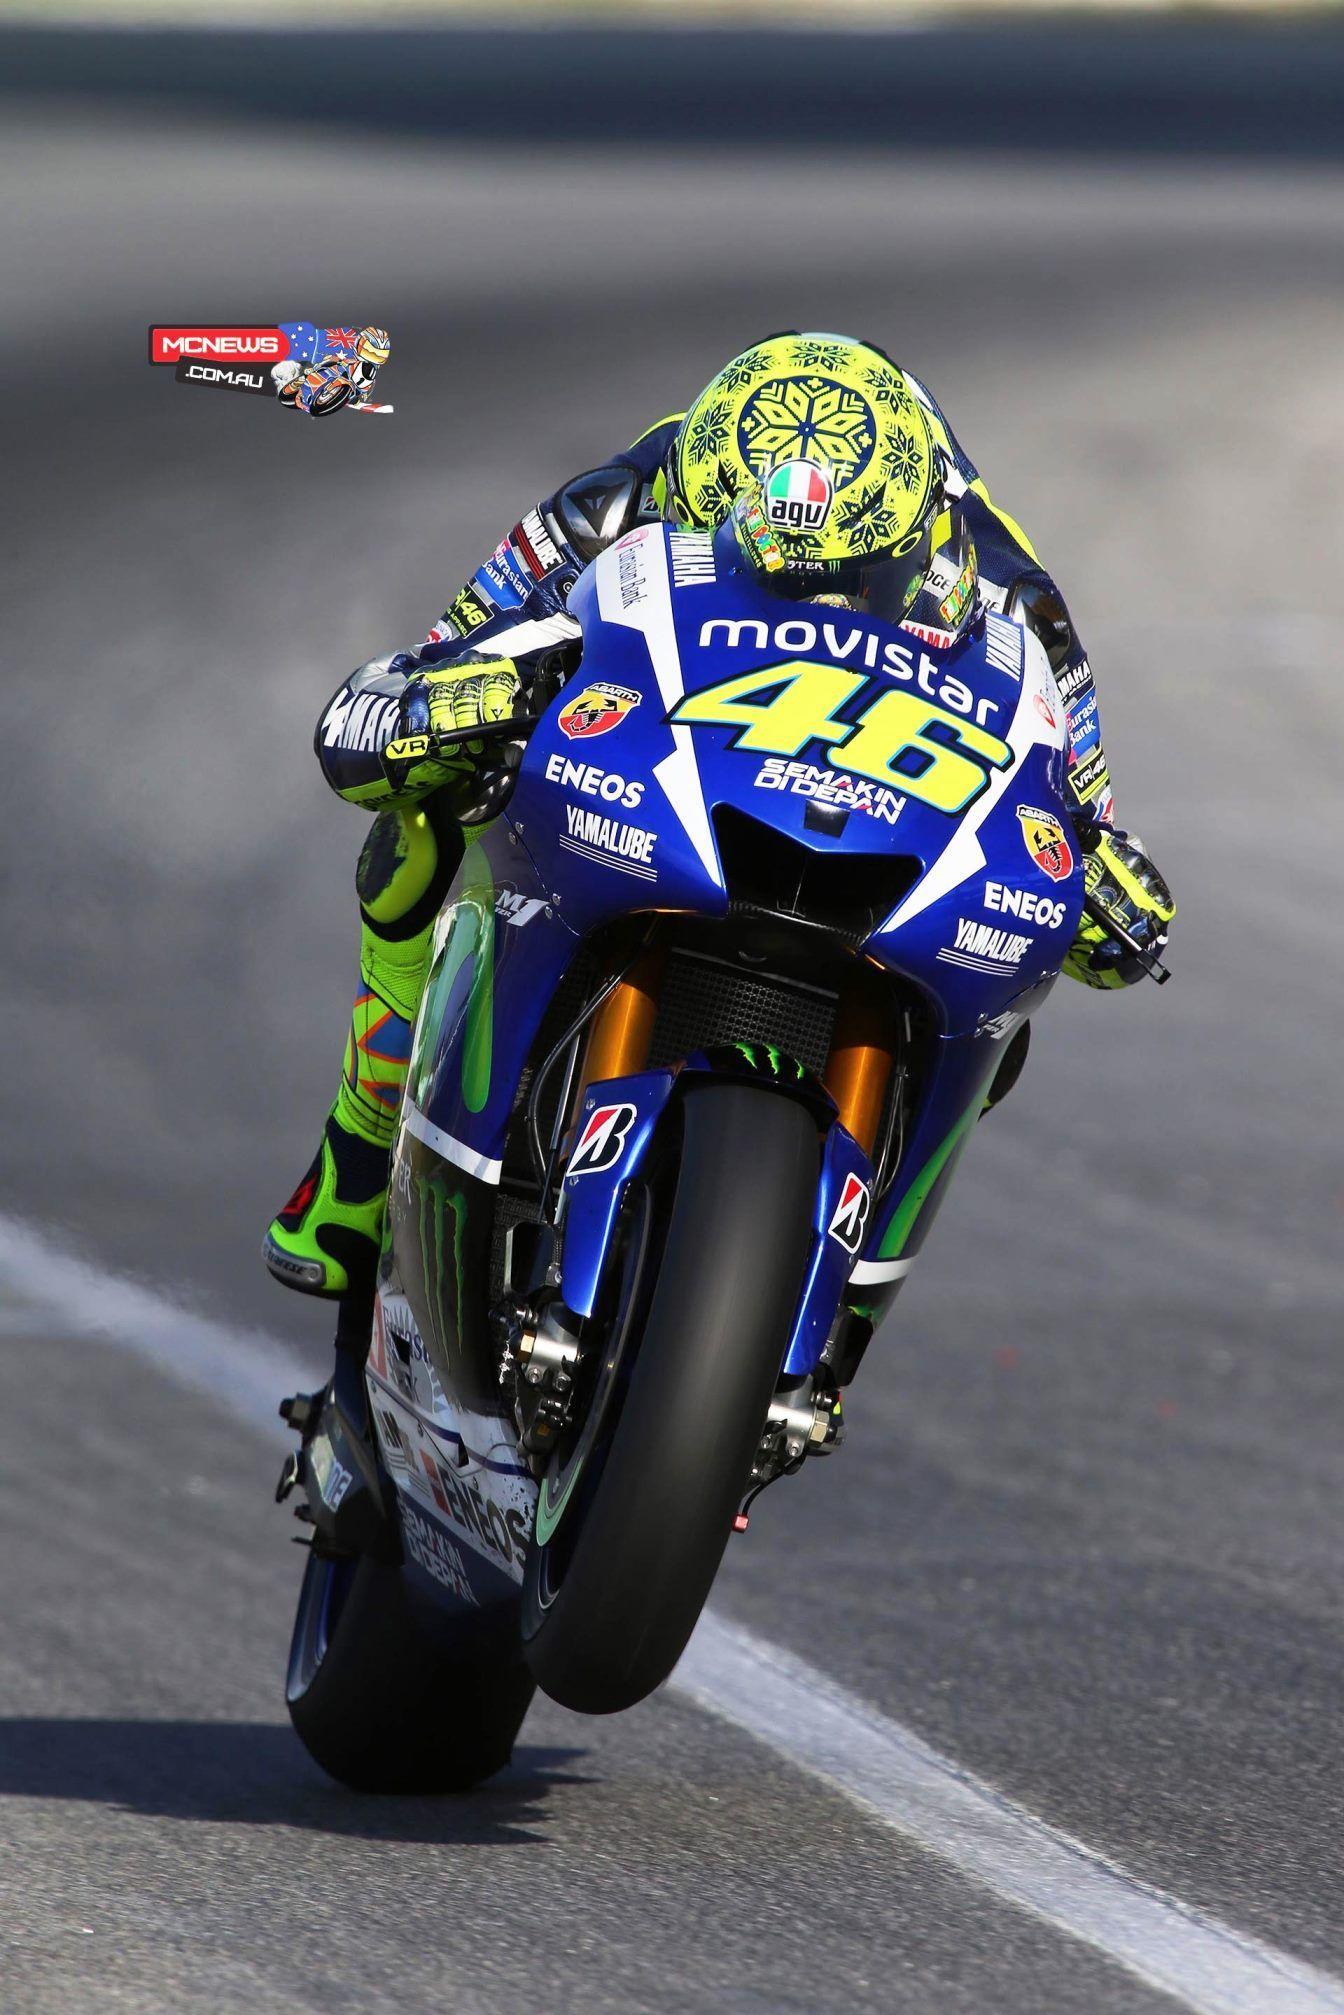 VR46 2021 Wallpapers - Wallpaper Cave